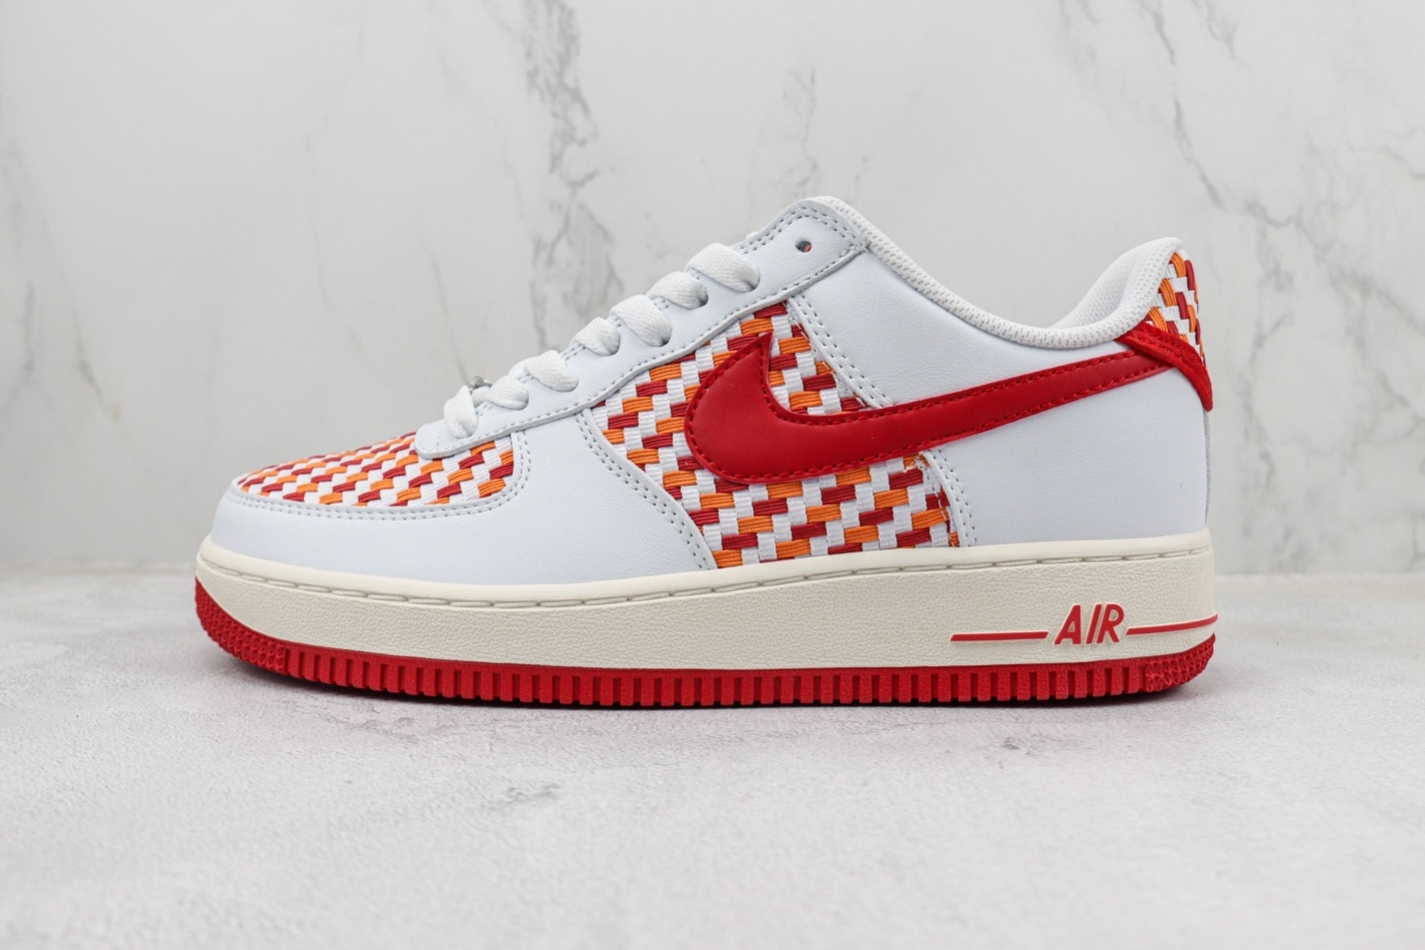 Nike Air Force 1 07 Low White Red Orange DM1060-161 - Stylish & Colorful Sneakers